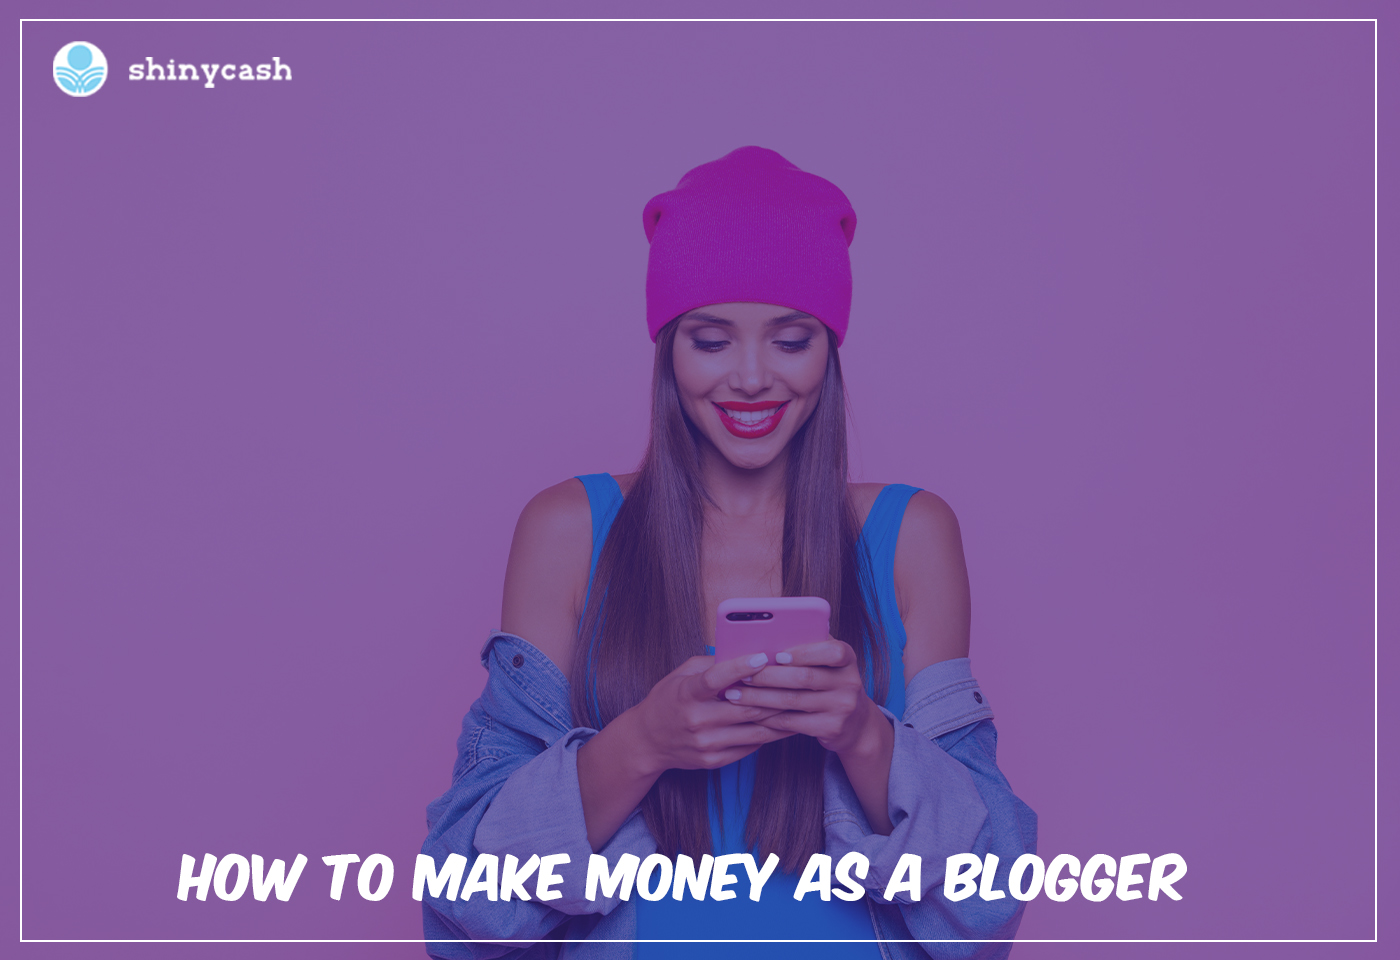 How to Make Money as a Blogger